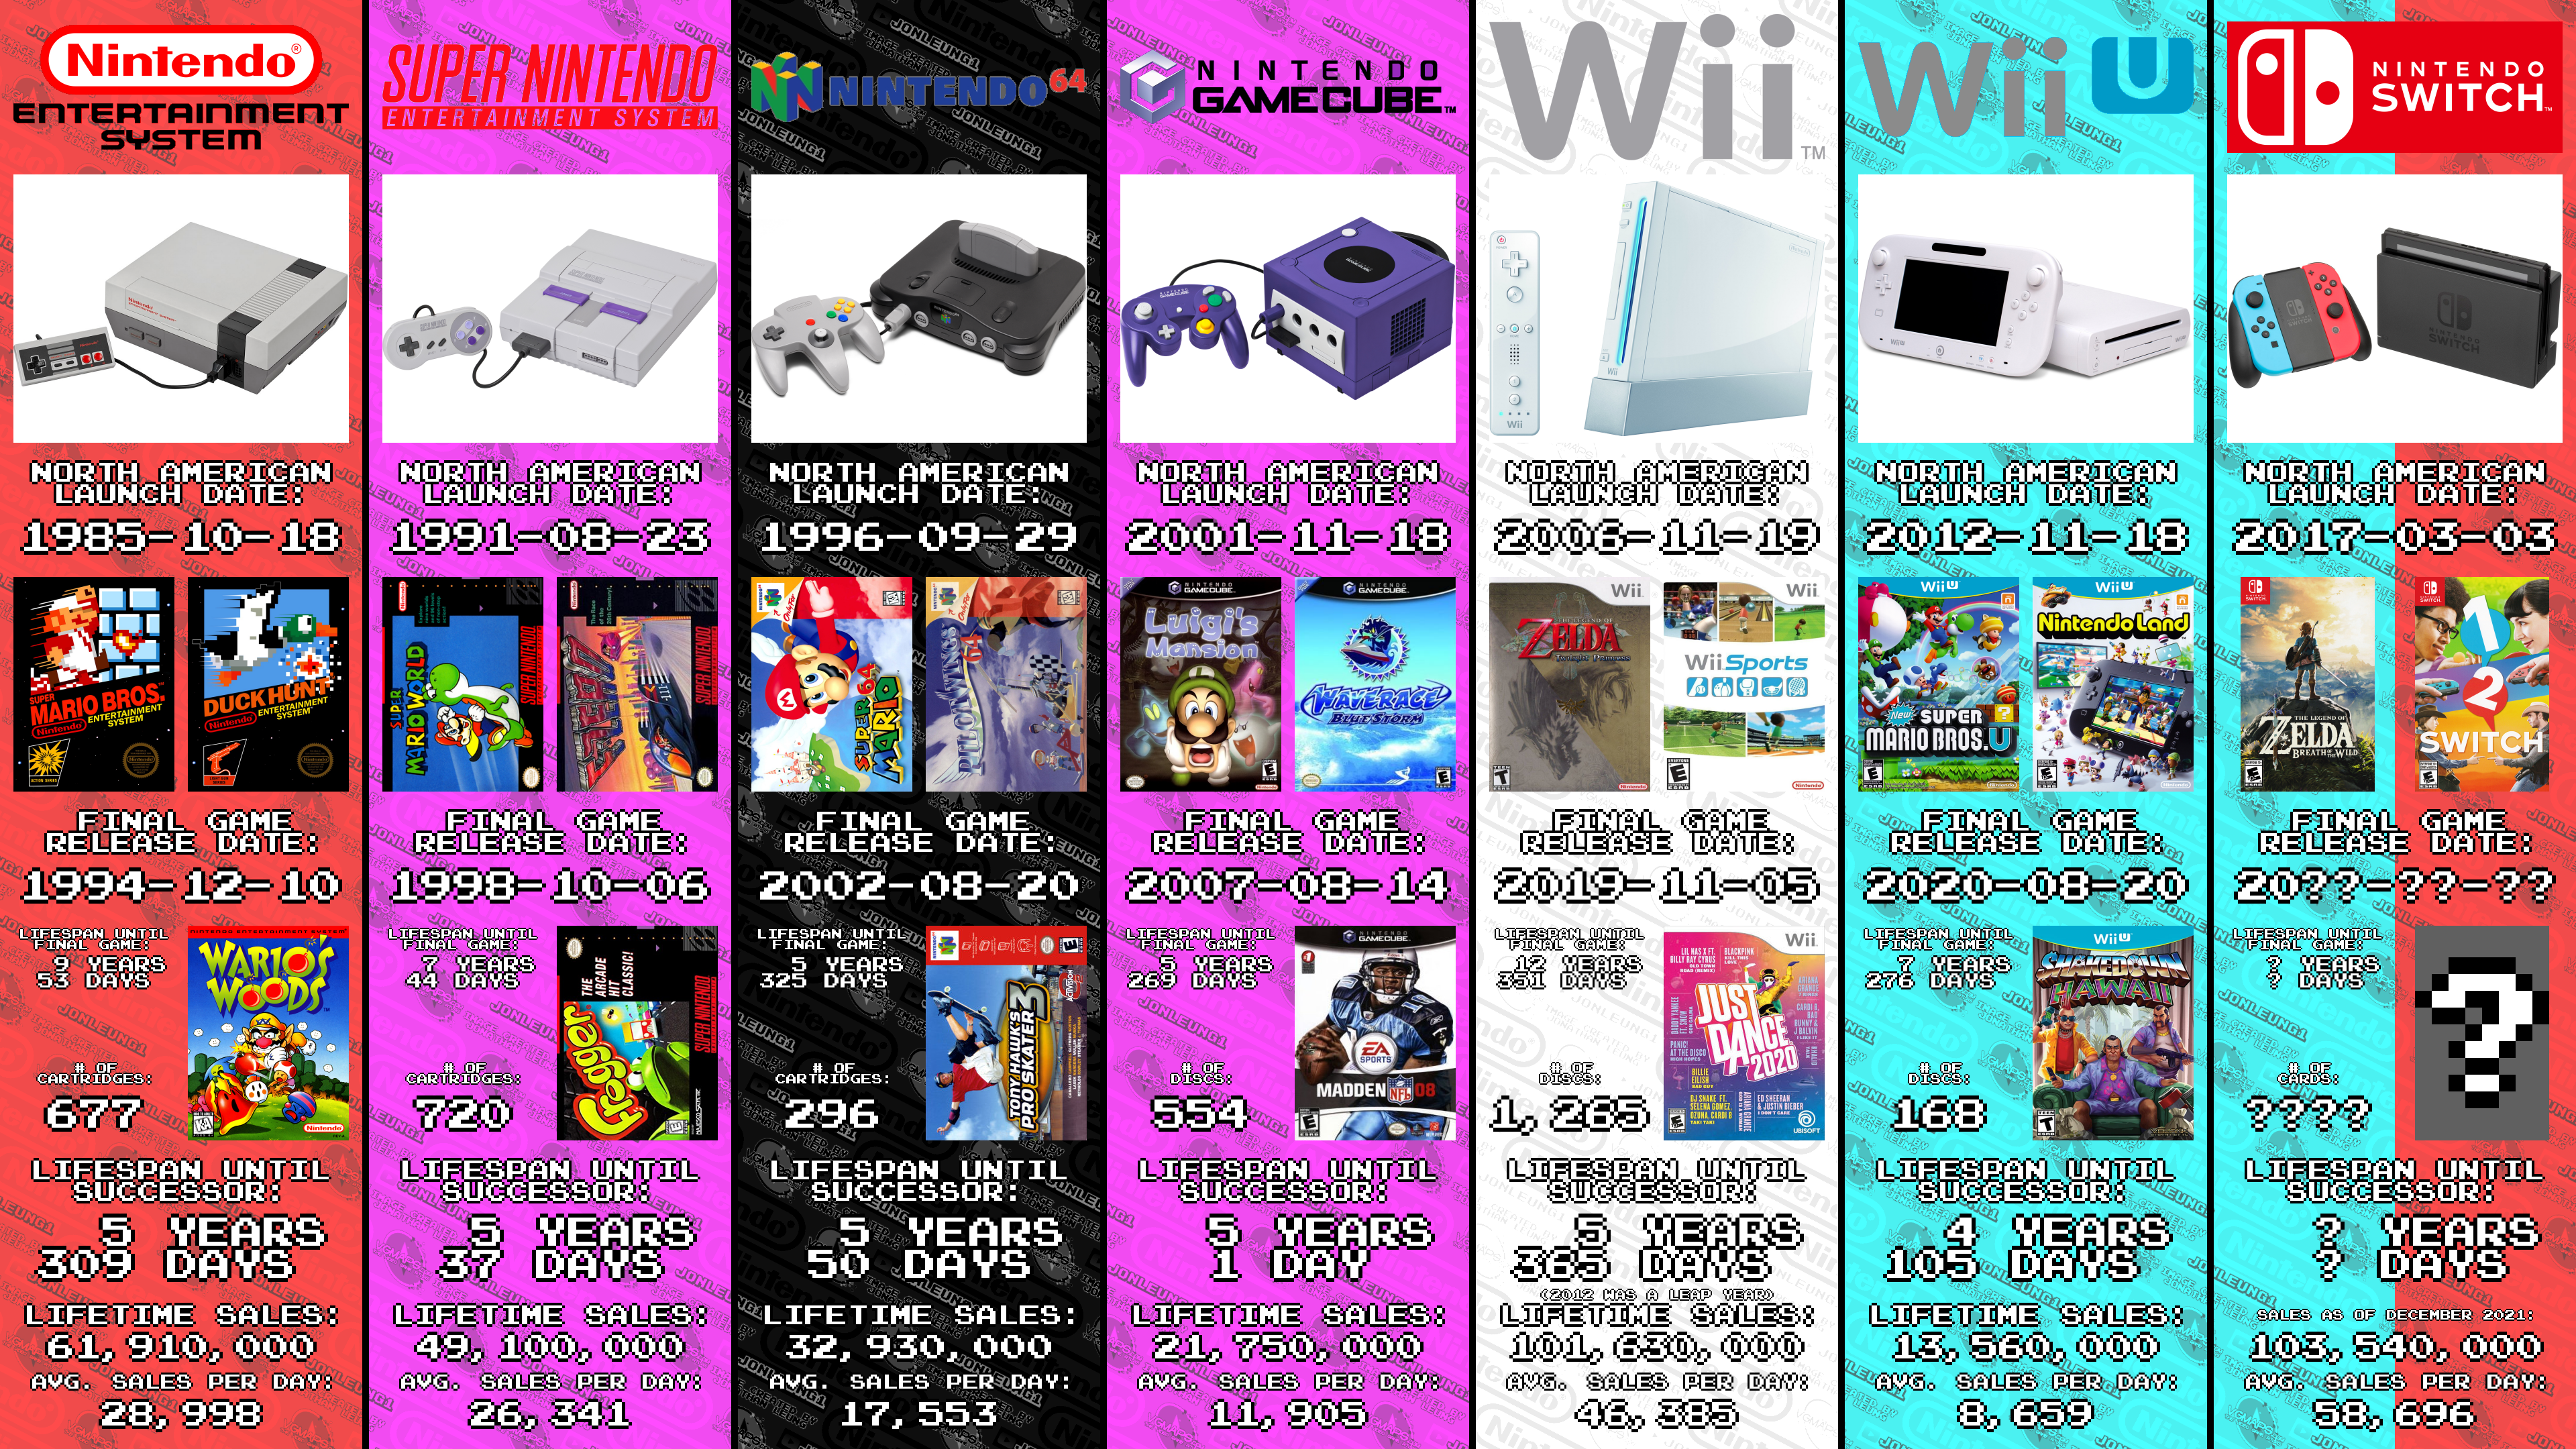 The Switch turns 6 years old today, so here's an infographic I made about how long each Nintendo console lasted before its successor. :